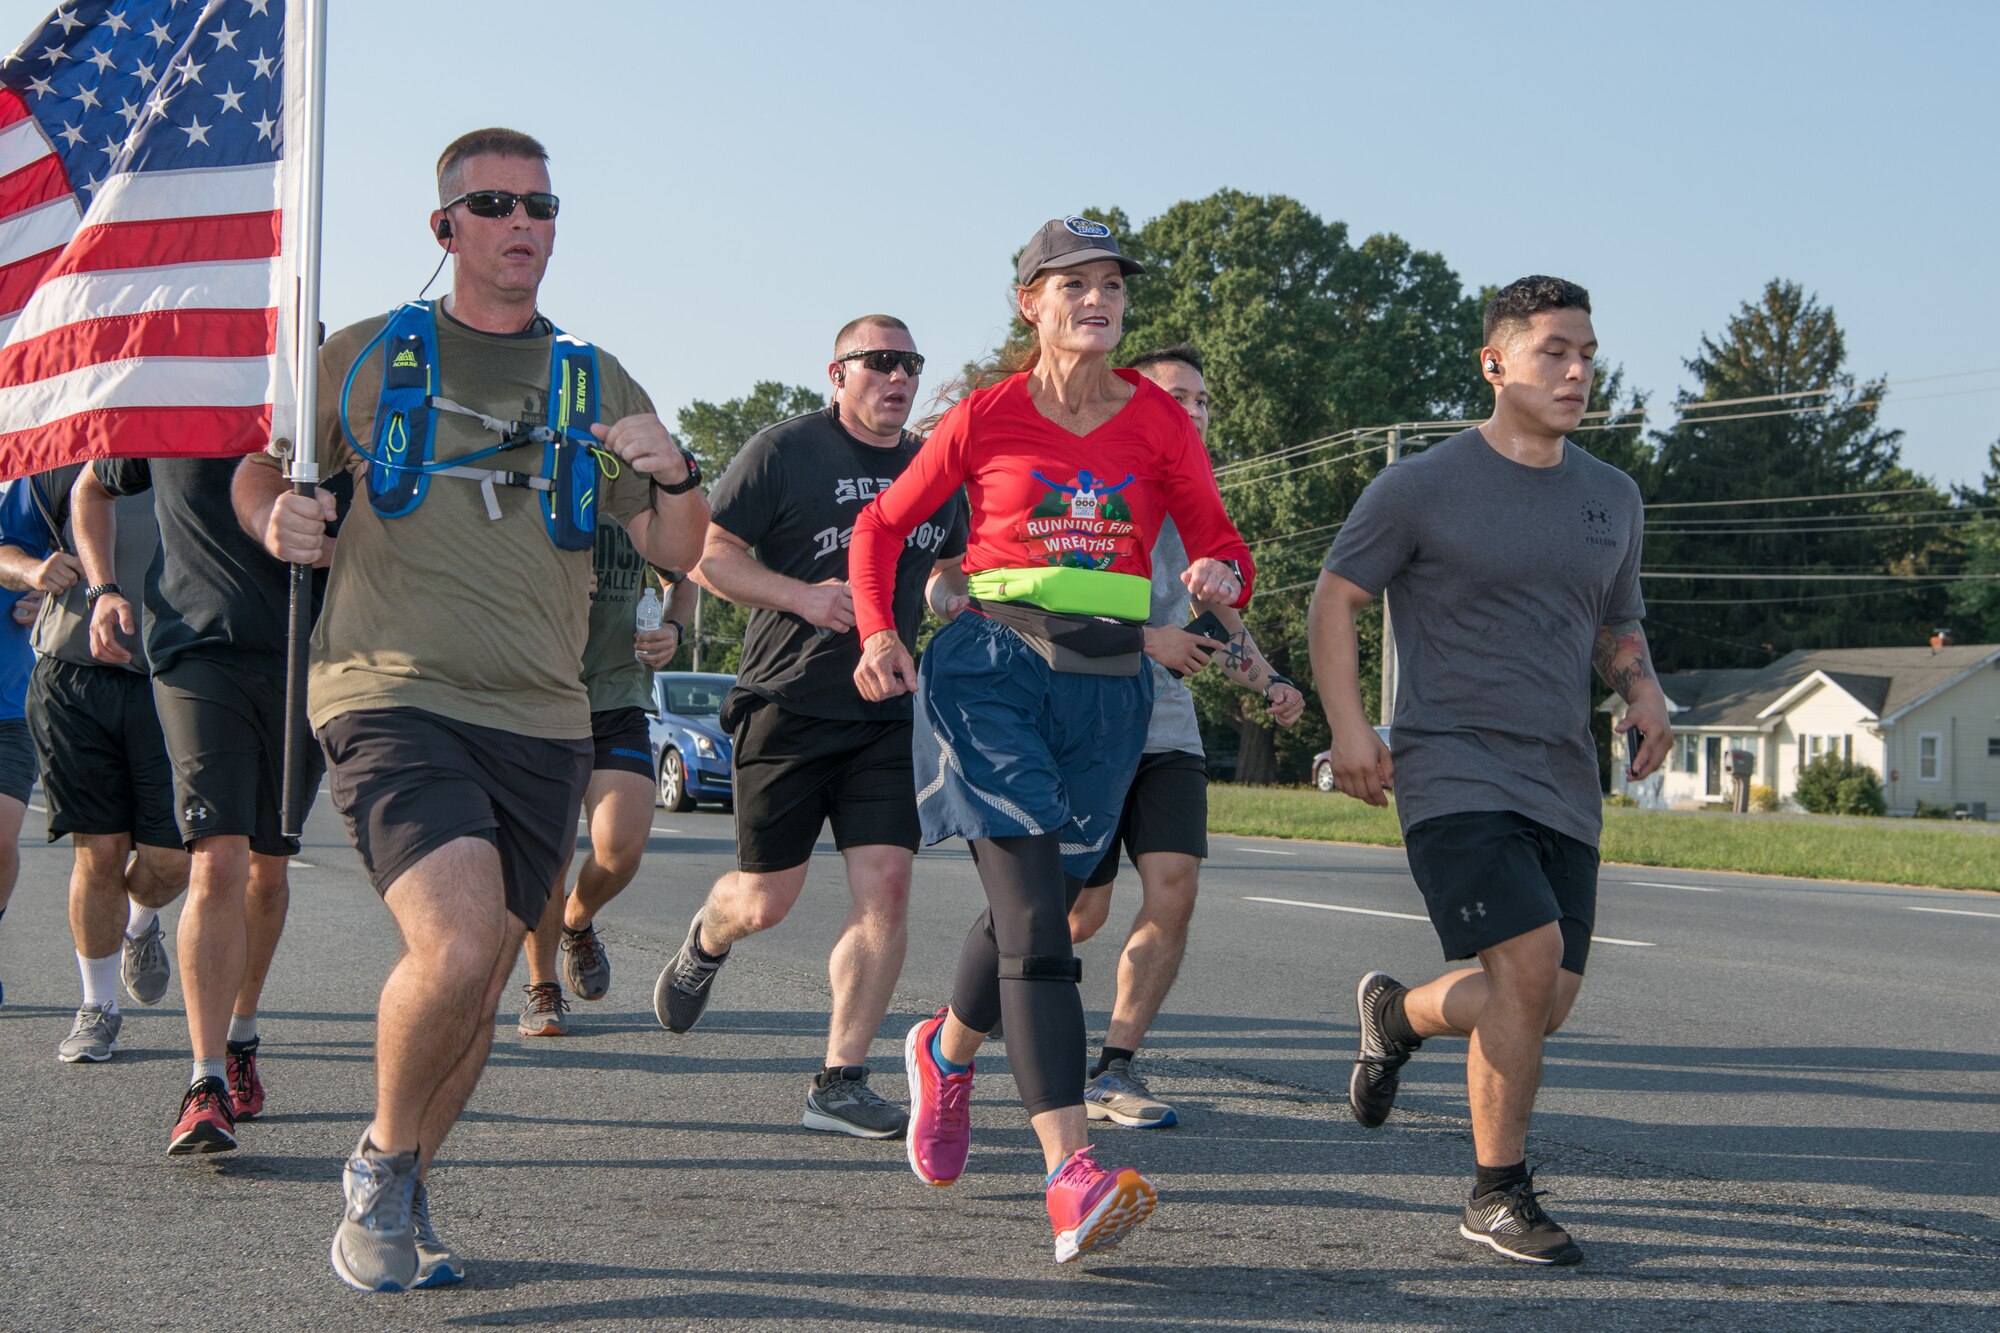 Master Sgt. Trevor Derr, 736th Aircraft Maintenance Squadron C-17 production superintendent (with flag), and Cathy Powers, Gold Star Mother, run alongside members of Team Dover during the “Running Fir Wreaths” campaign Sept. 12, 2019, outside Dover Air Force Base, Del. Powers plans to run 1,000 miles across all 50 states in honor of her son and fallen veterans. (U.S. Air Force Photo by Mauricio Campino)